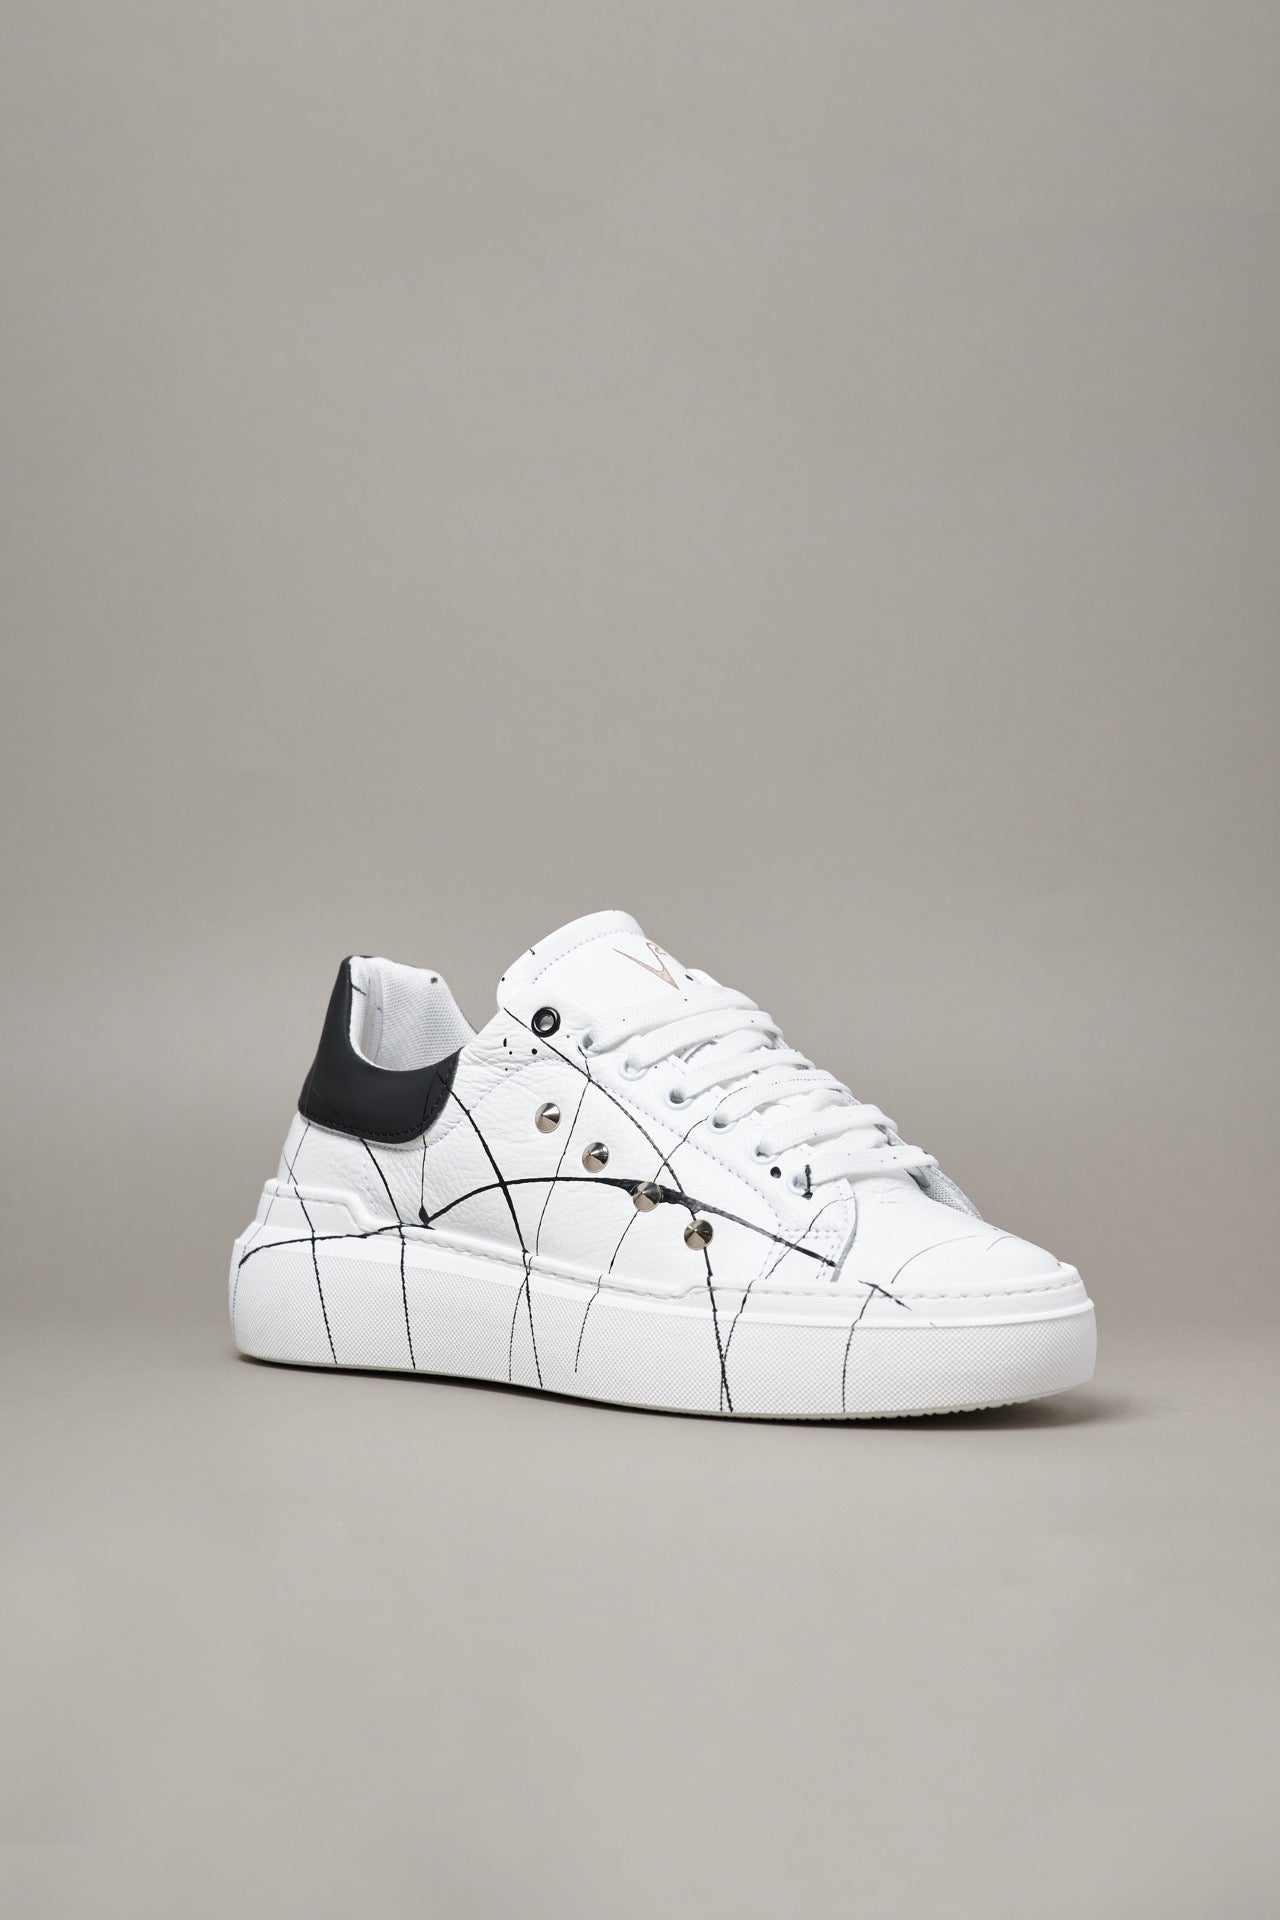 HAMMER - High sole sneakers in textured leather with Black back with studs and splashes of paint